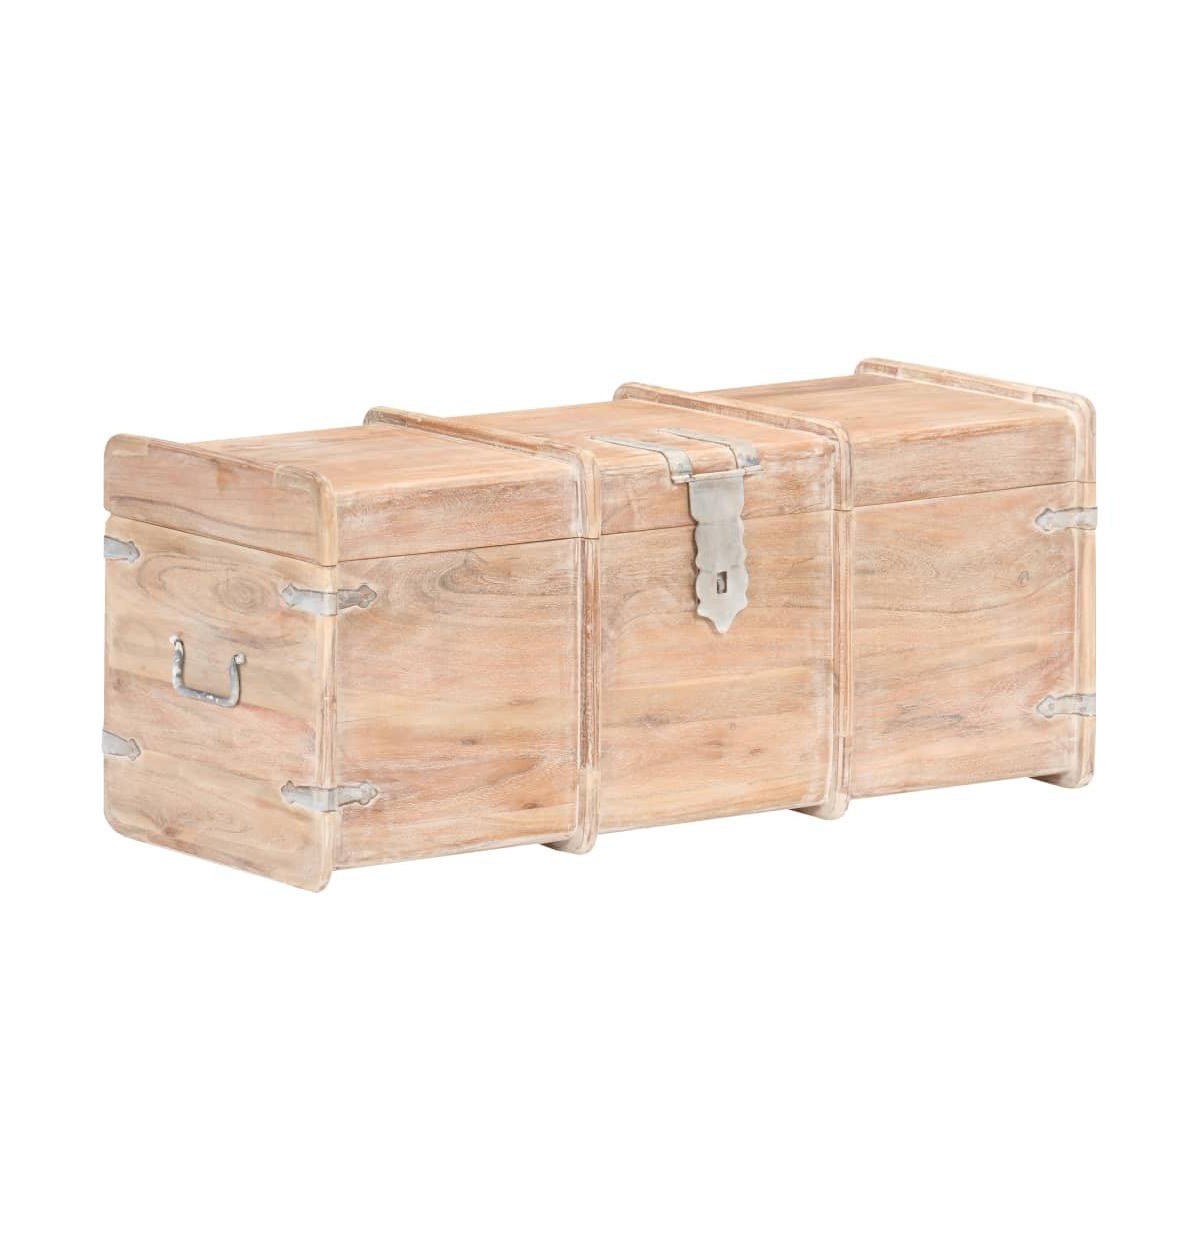 Storage Chest 35.4"x15.7"x15.7" Solid Acacia Wood - Brown